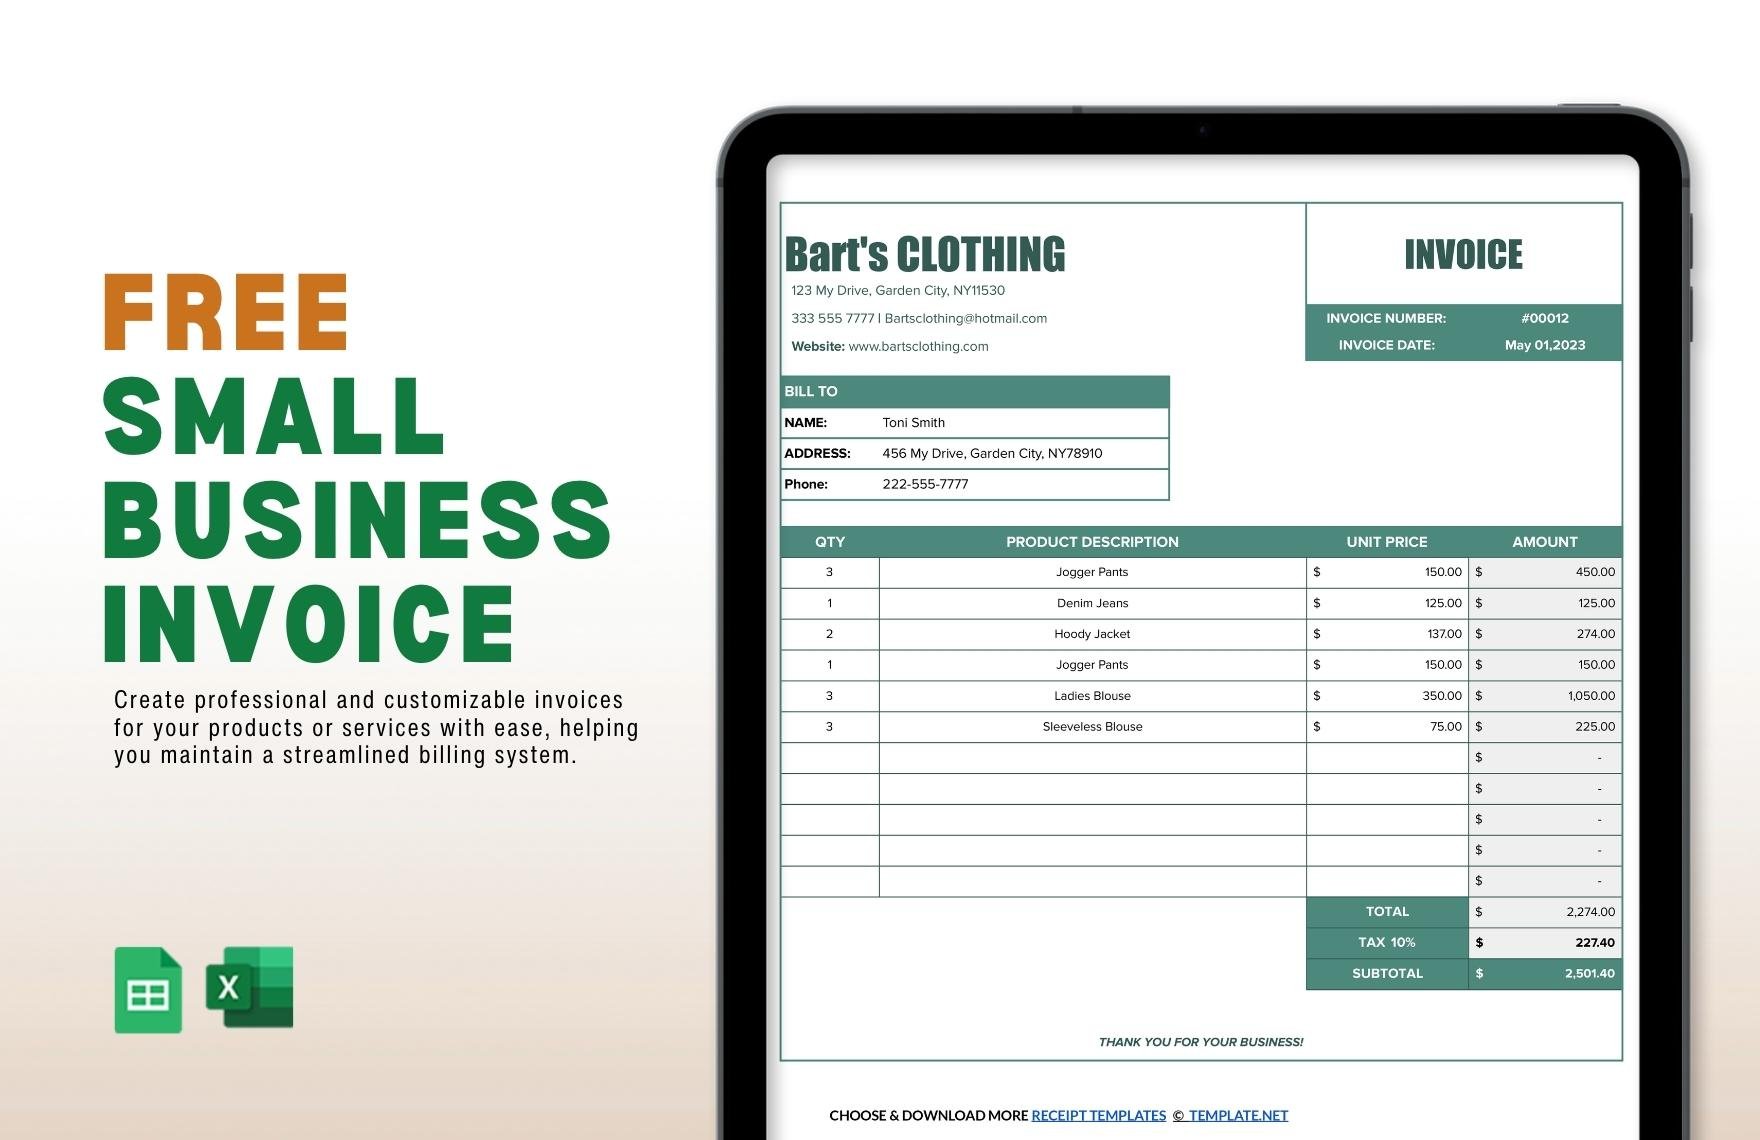 Free Small Business Invoice